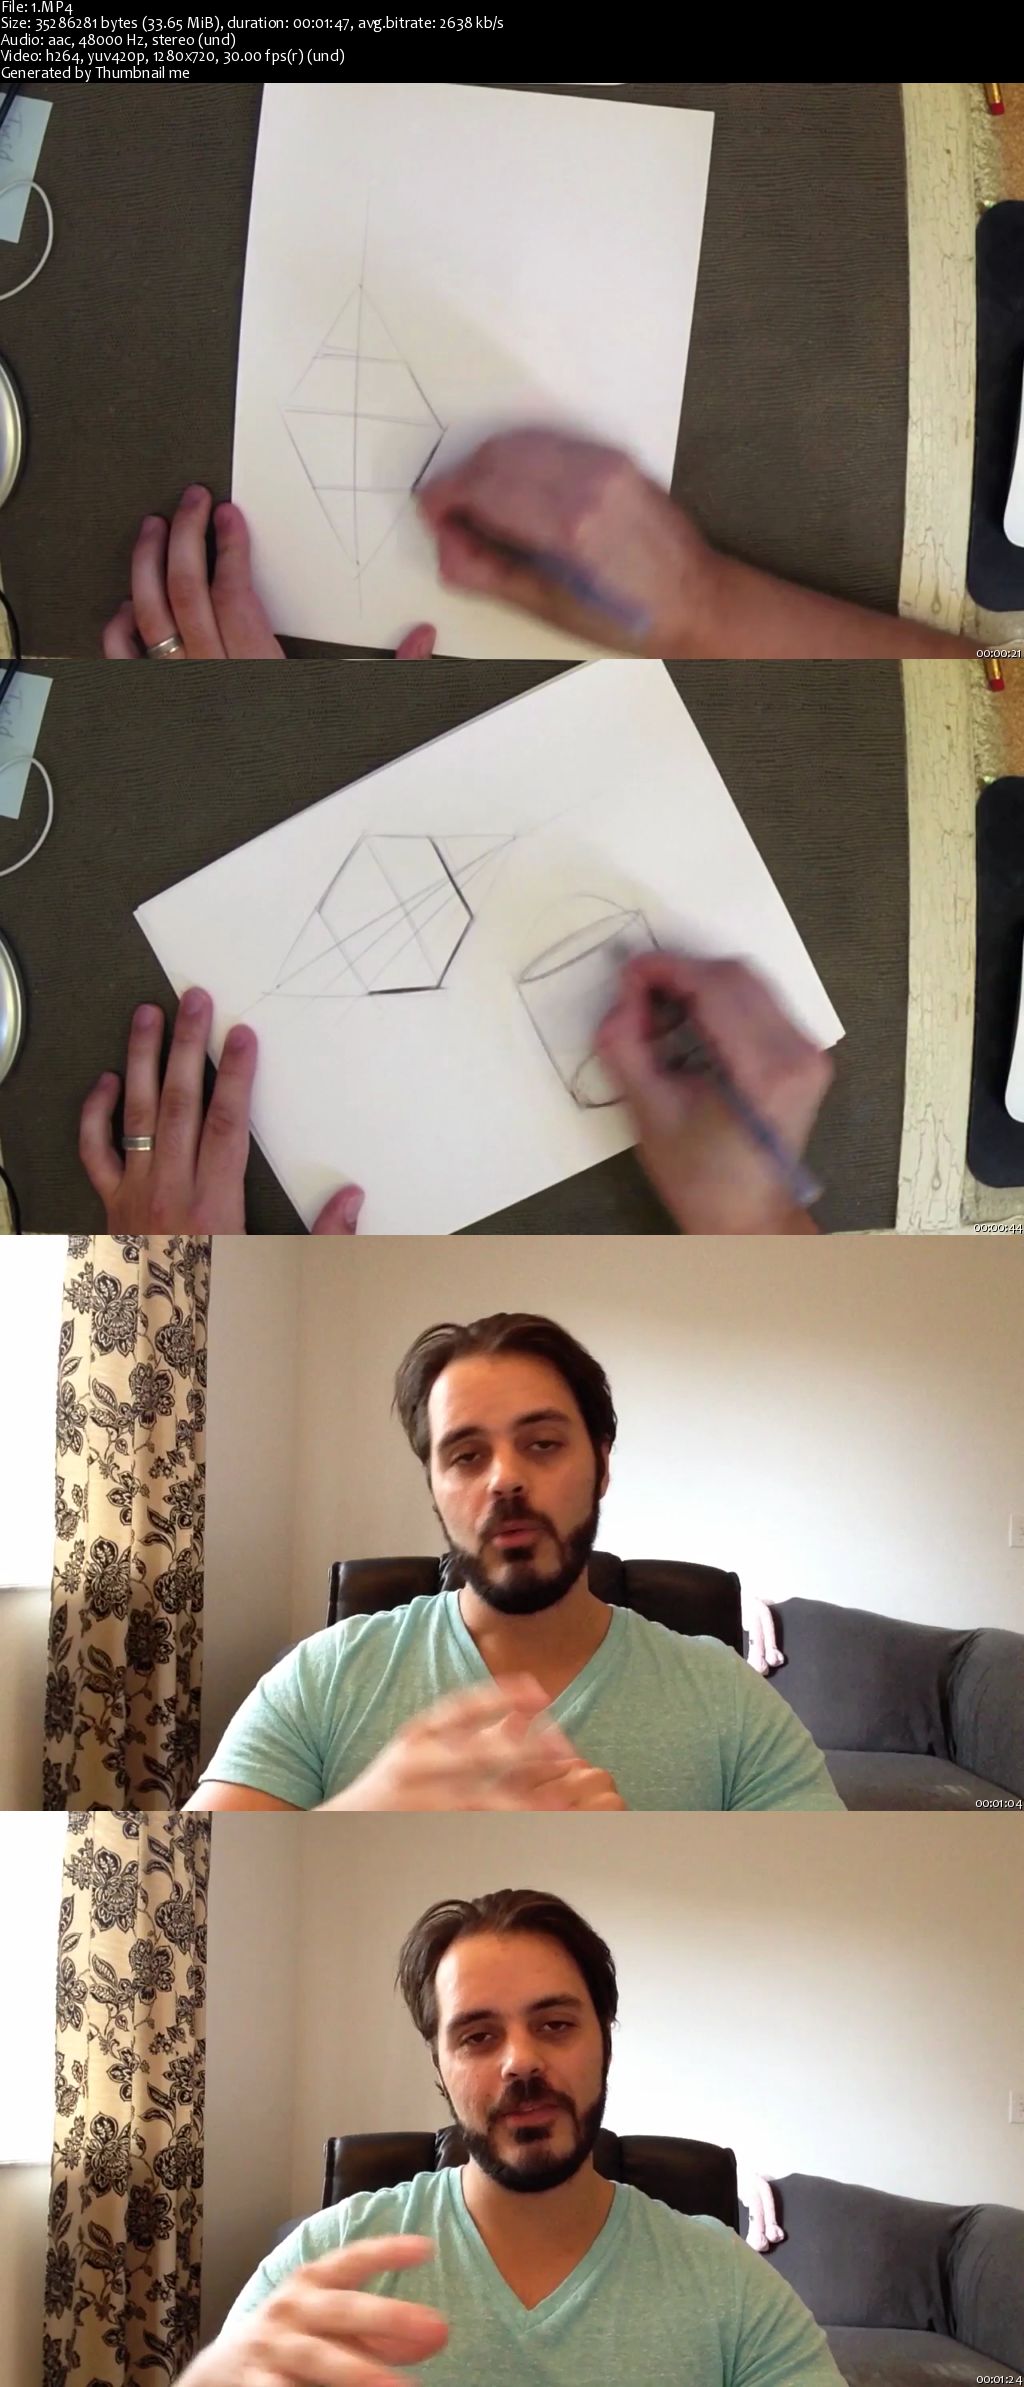 Industrial Design Sketching: Learn to Sketch Products in Perspective & Boost Your Creativity